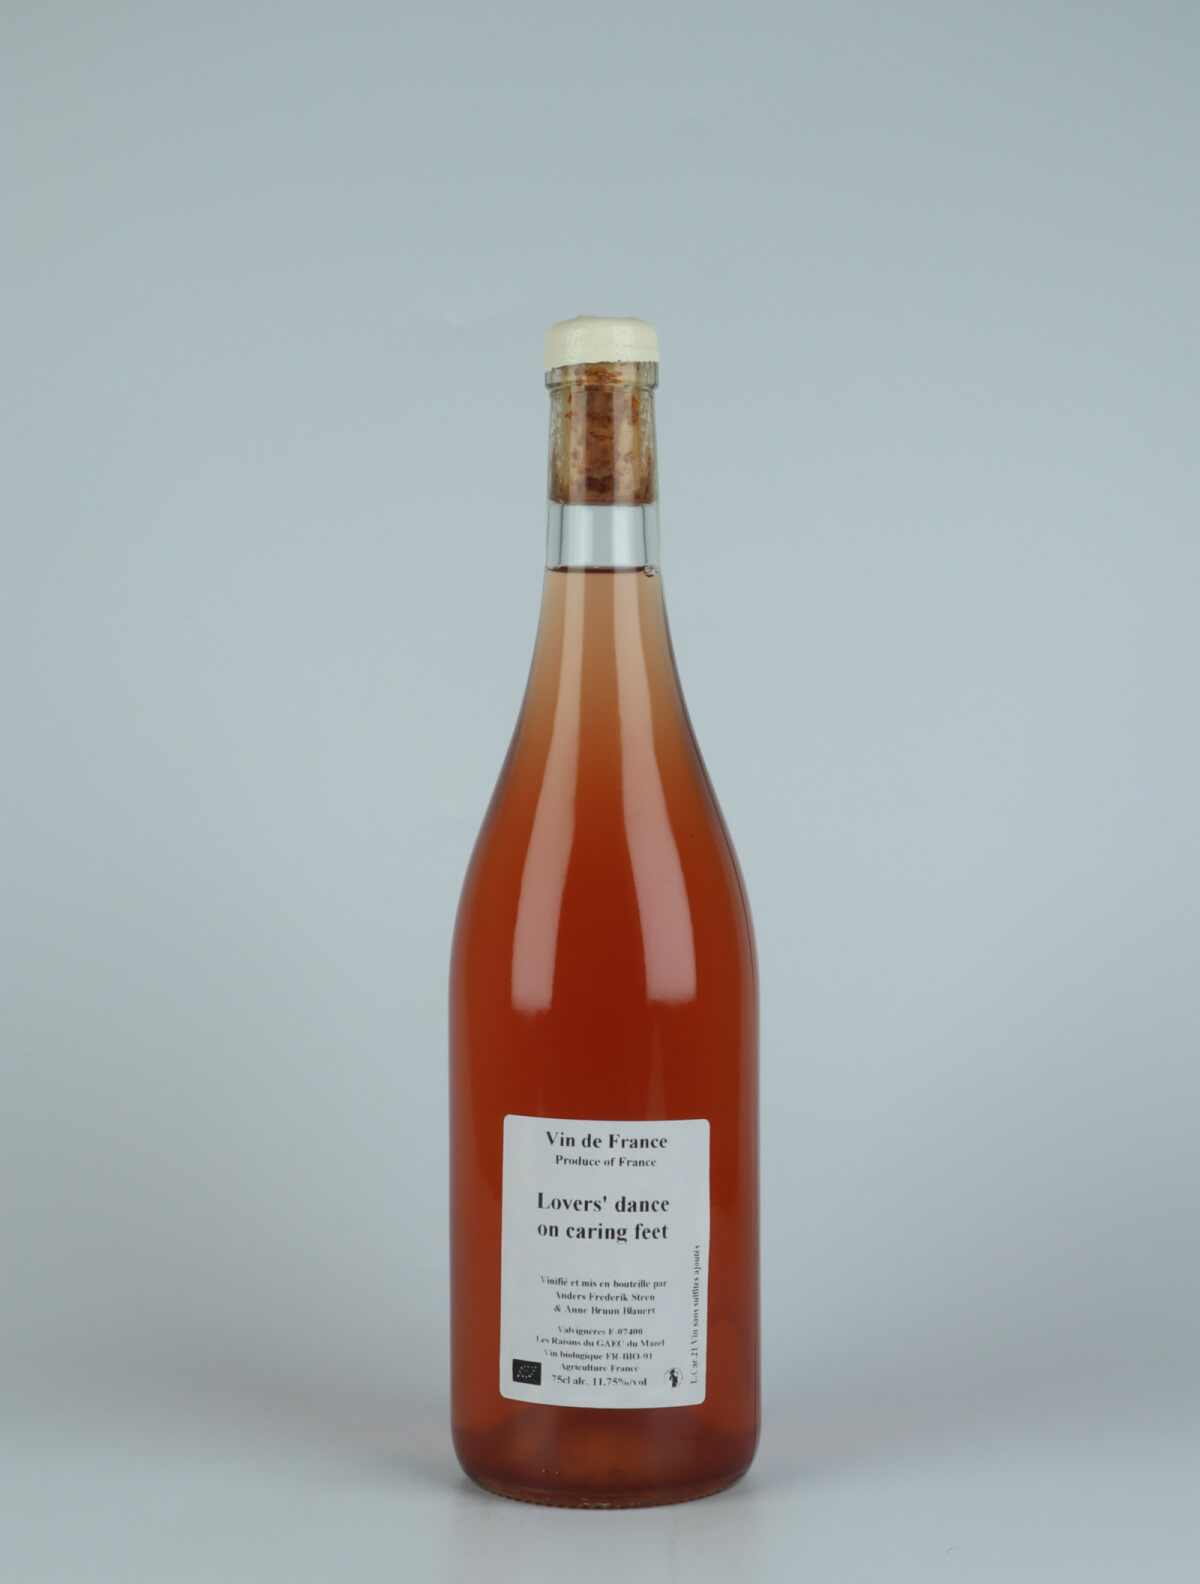 A bottle 2021 Lovers’ dance on caring feet Rosé from , Ardèche in France